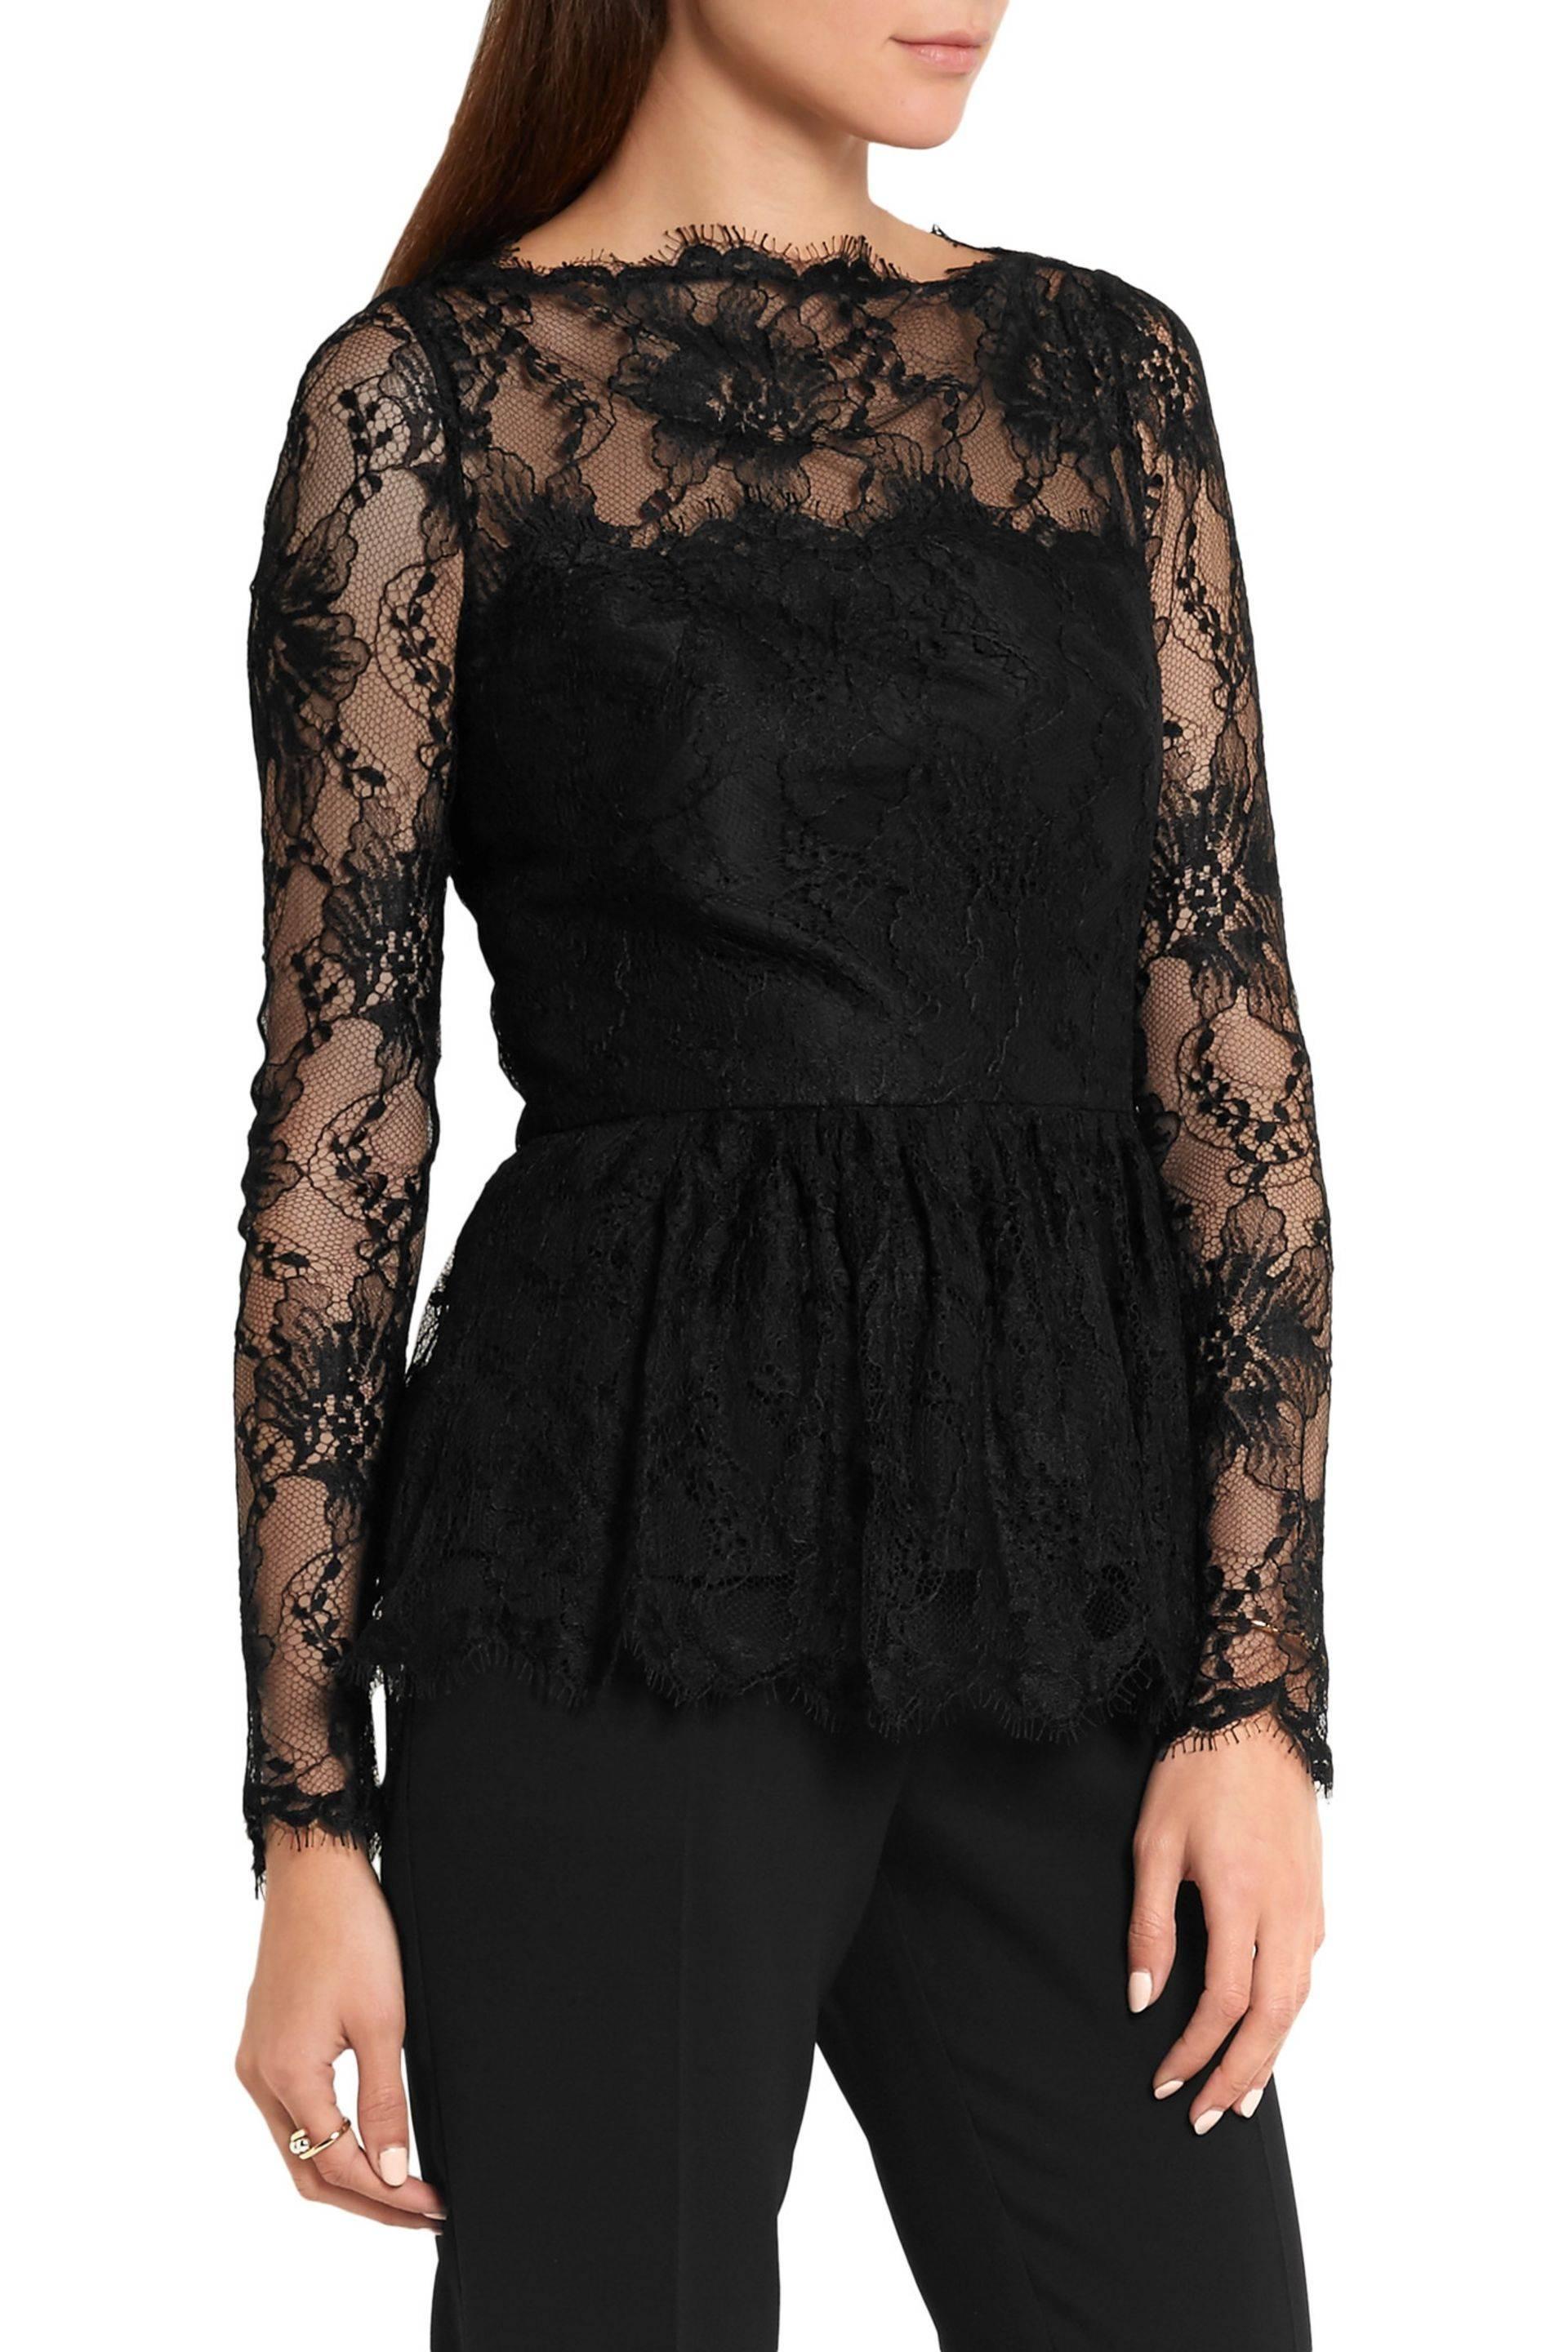 New Oscar de la Renta Black Lace Peplum Top
Designer size US 12.
Gathered peplum, partially lined. Concealed zip fastening along back.
Measurements: Length - 26 inches, Bust - 38/40, Waist - 33, Sleeve - 27.
80% Viscose, 20% Polyamide; Lining 100%